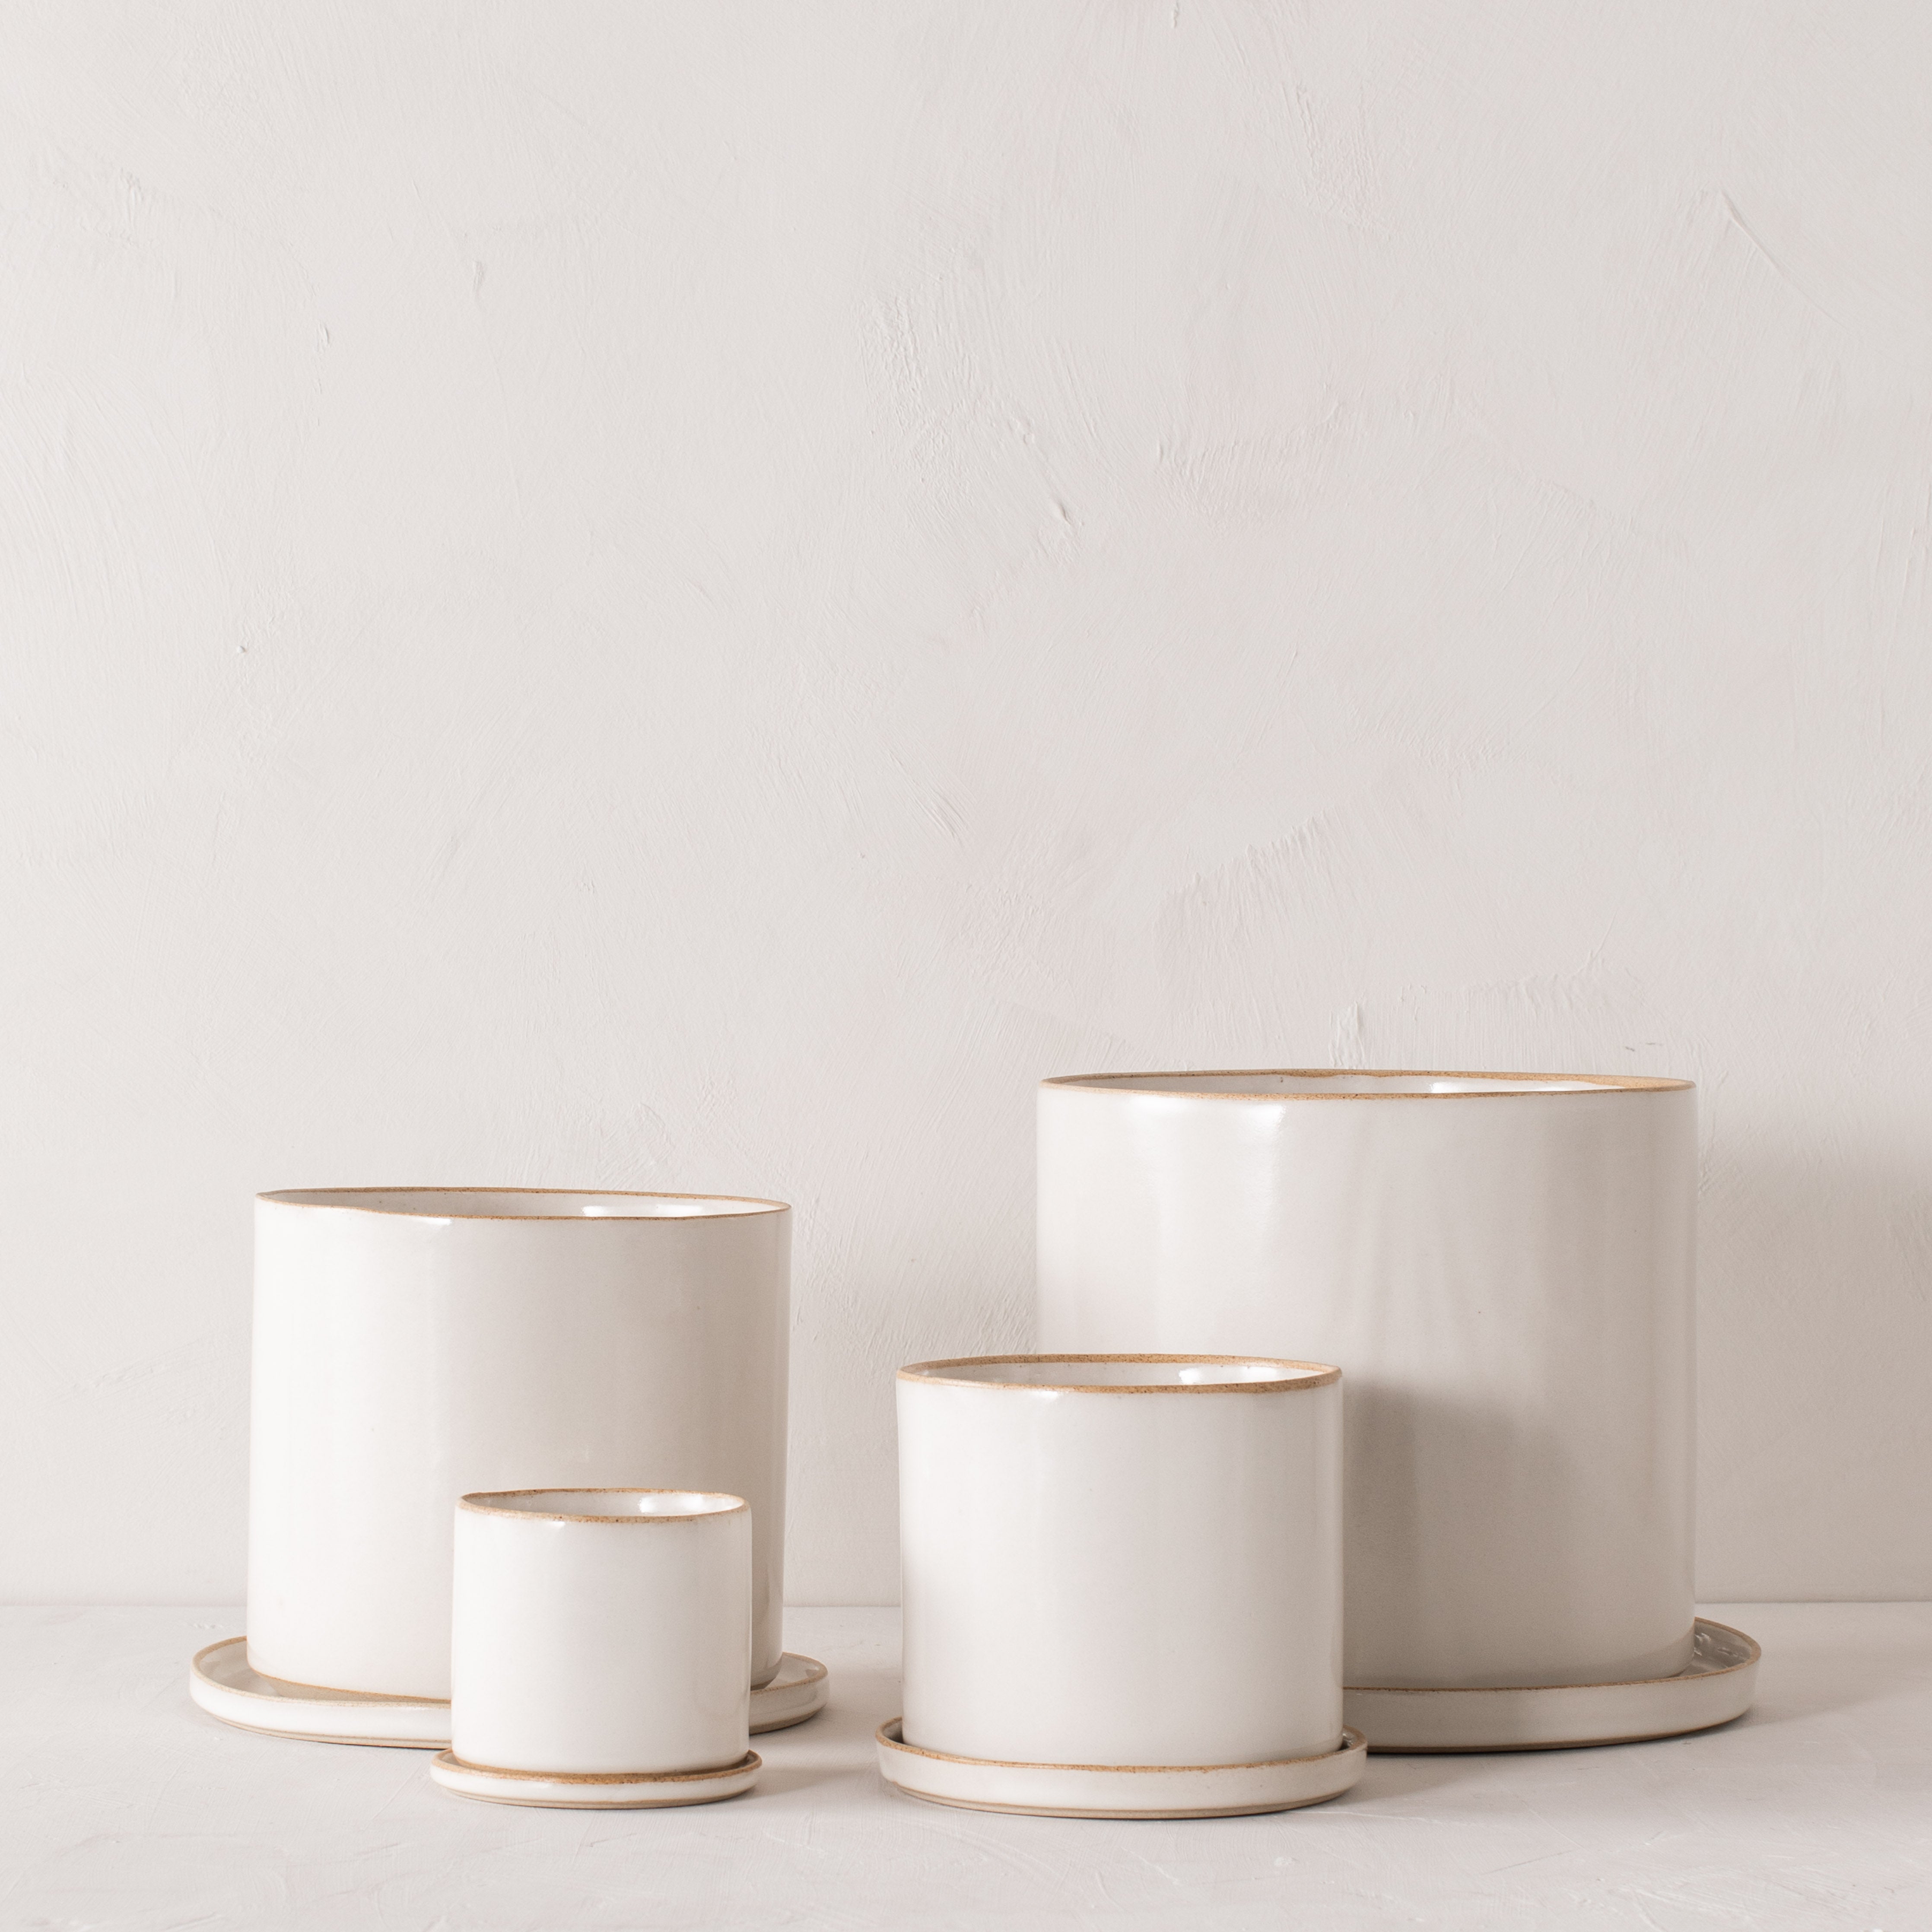 Four white ceramic planters with bottom drainage dishes, 4, 6, 8, and 10 inches. Staged on a white plaster textured tabletop against a plaster textured white wall. Designed by Convivial Production, sold by Shop Verdant, Kansas City, Mo plant store.